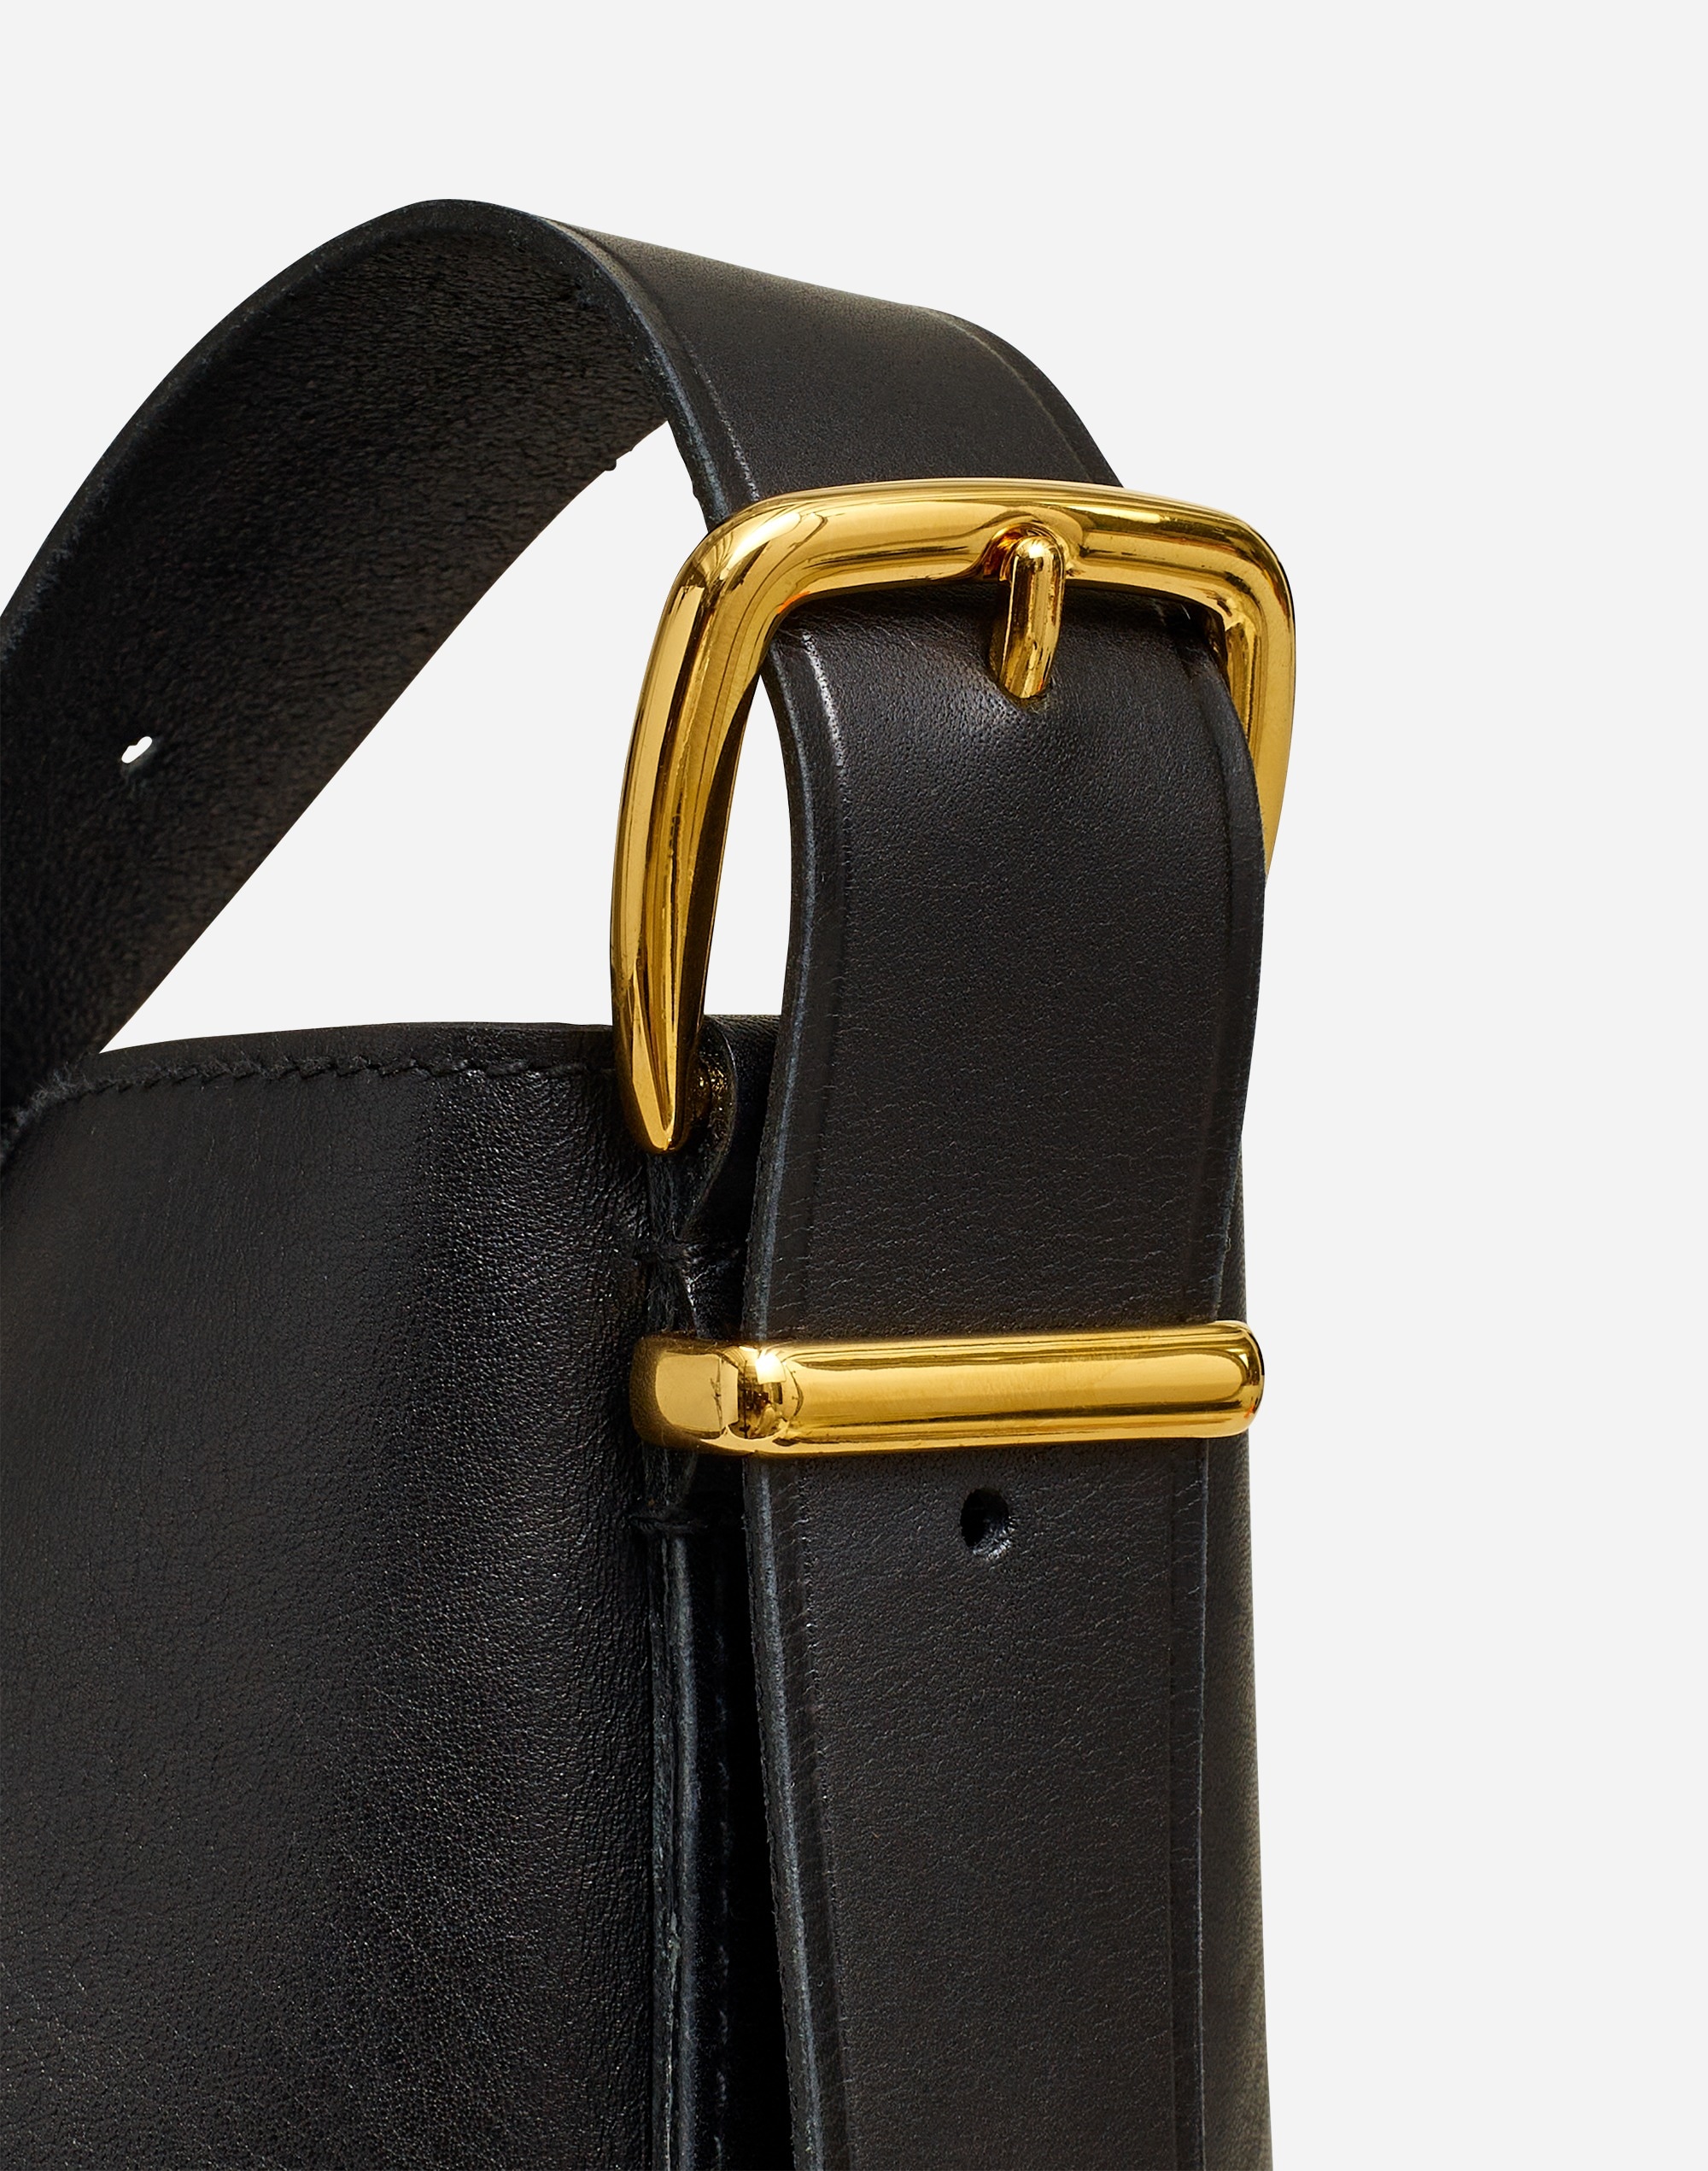 The Essential Bucket Tote in Leather